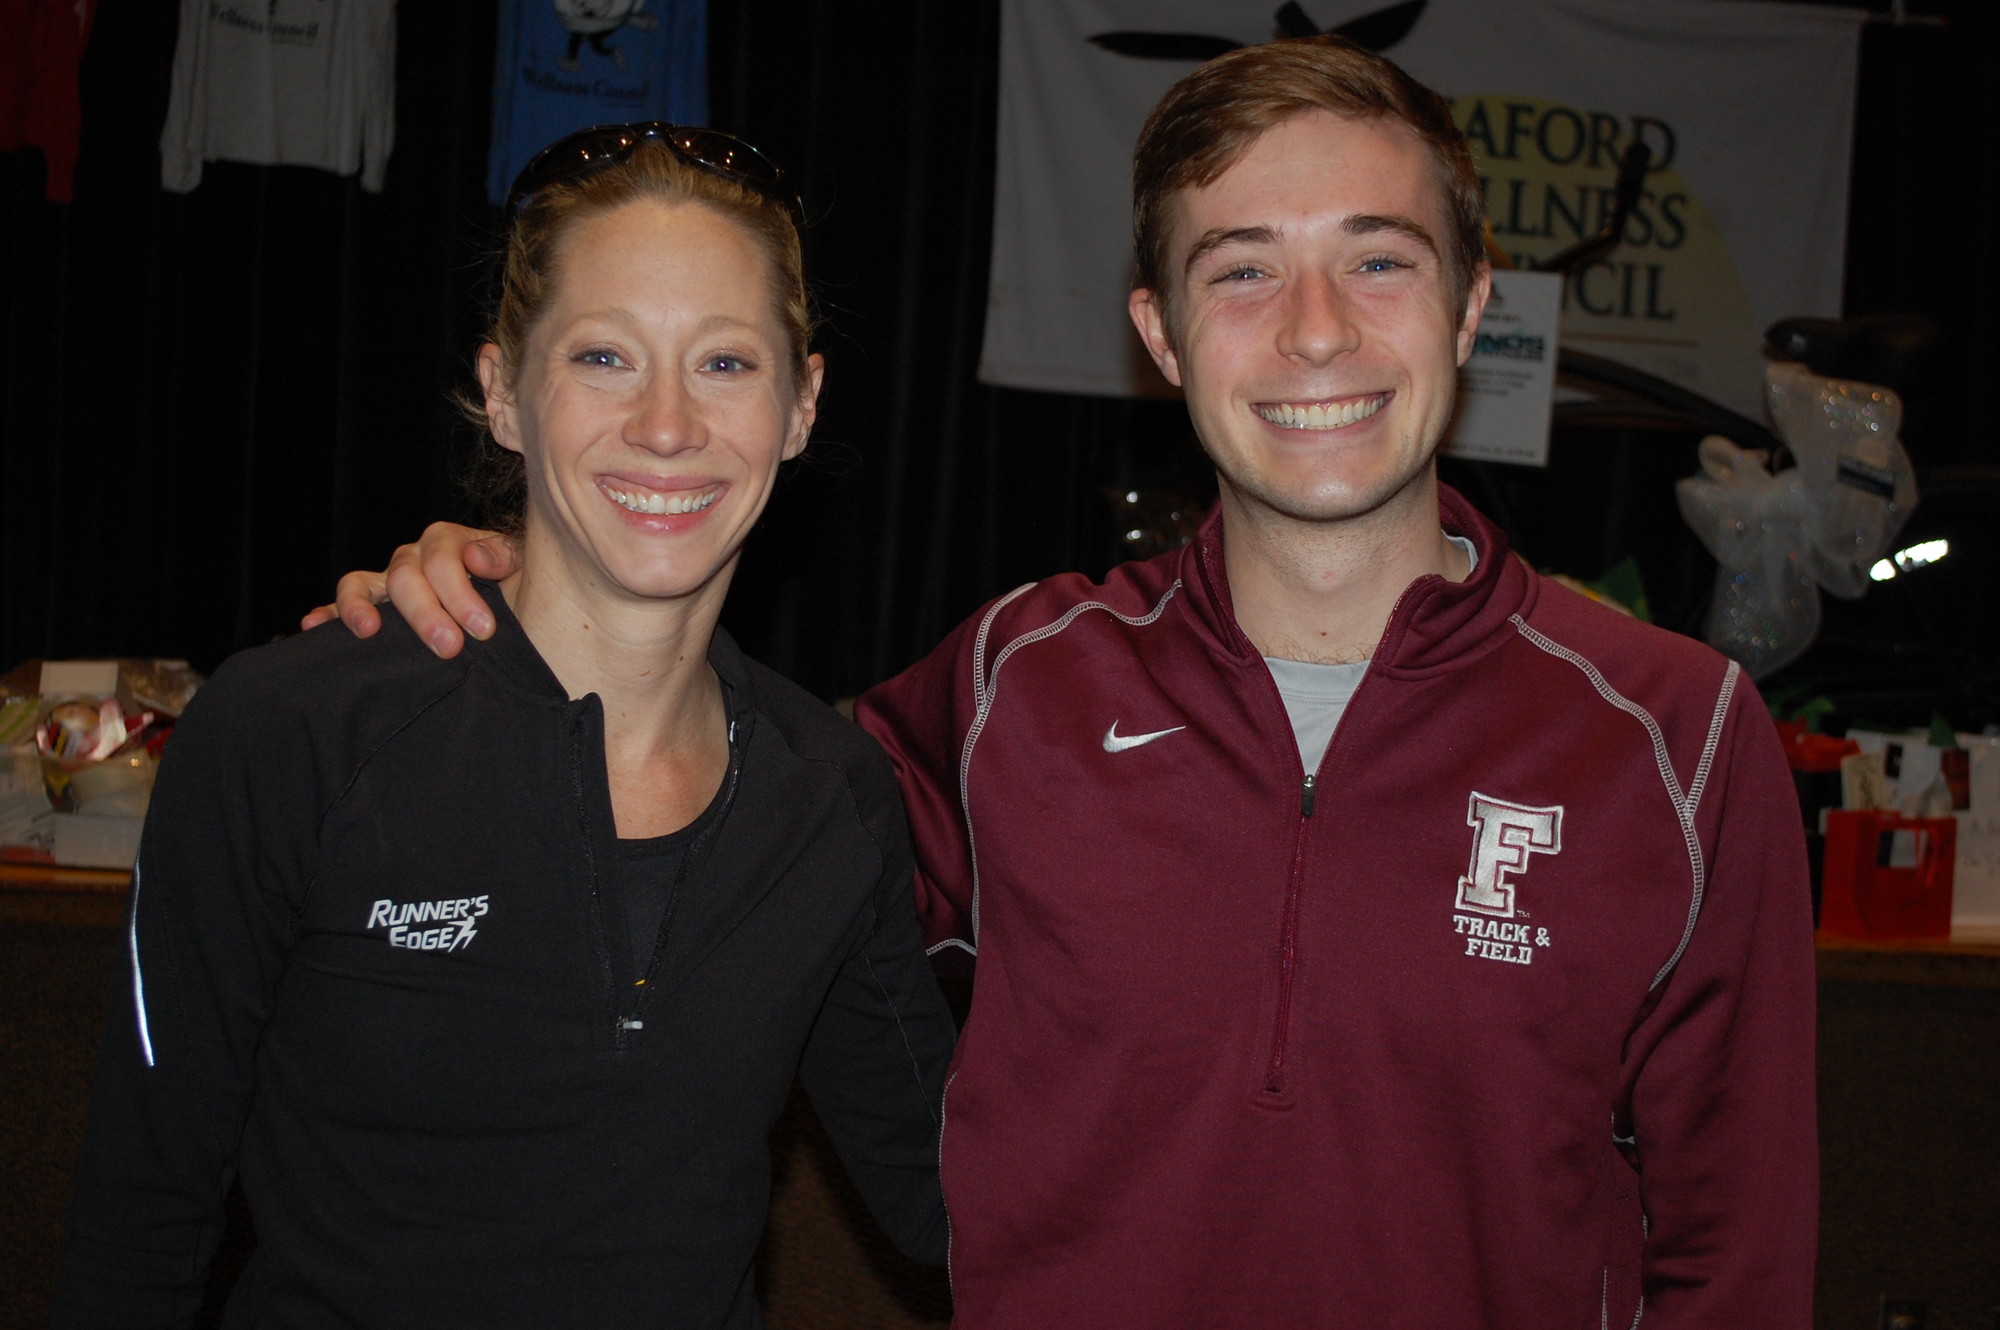 Lauren Jasinski, of Cold Spring Harbor, and Patrick Burke, of Seaford, were the top female and male finishers.